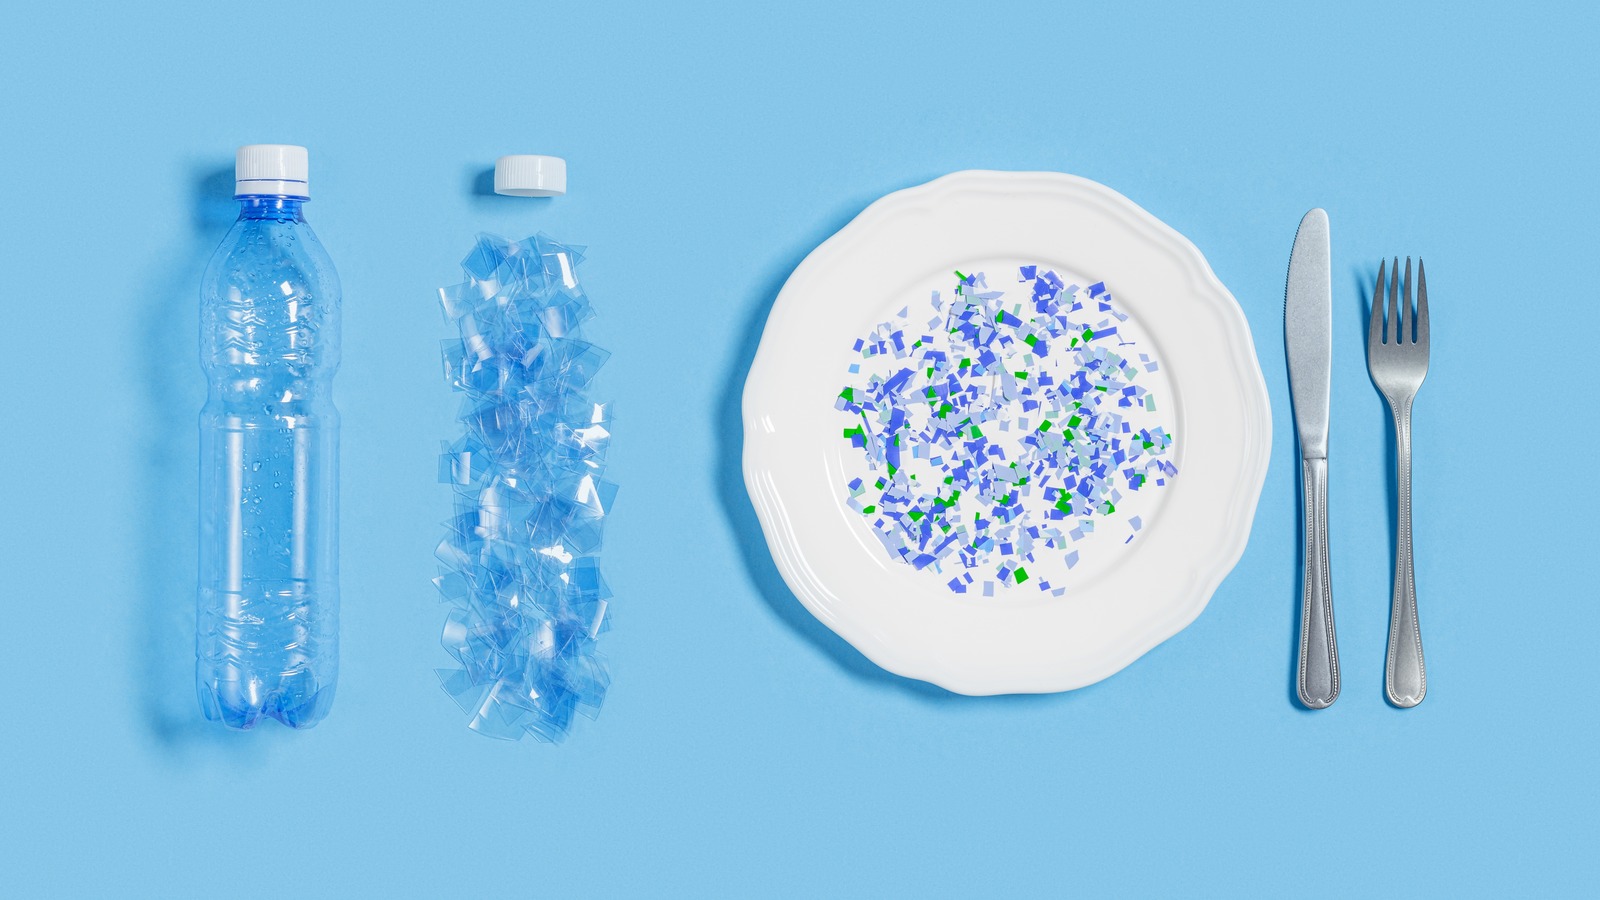 https://www.tastingtable.com/img/gallery/14-every-day-tips-to-reduce-the-consumption-of-microplastics/l-intro-1667402091.jpg